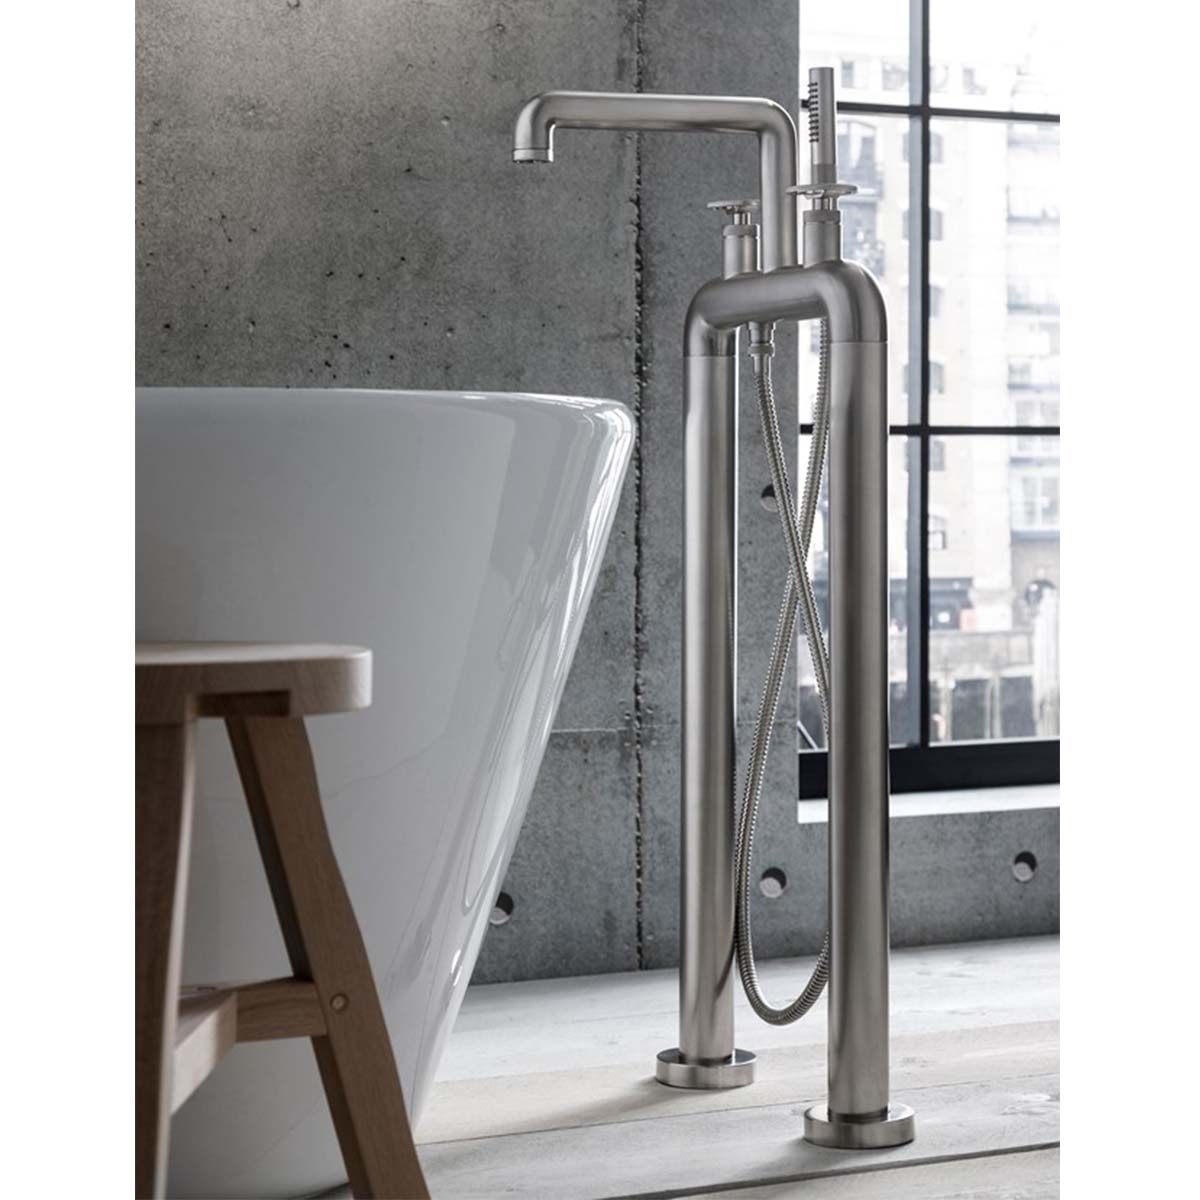 Crosswater Union Bath Shower Mixer With Wheel Handles Brushed Nickel Lifestyle